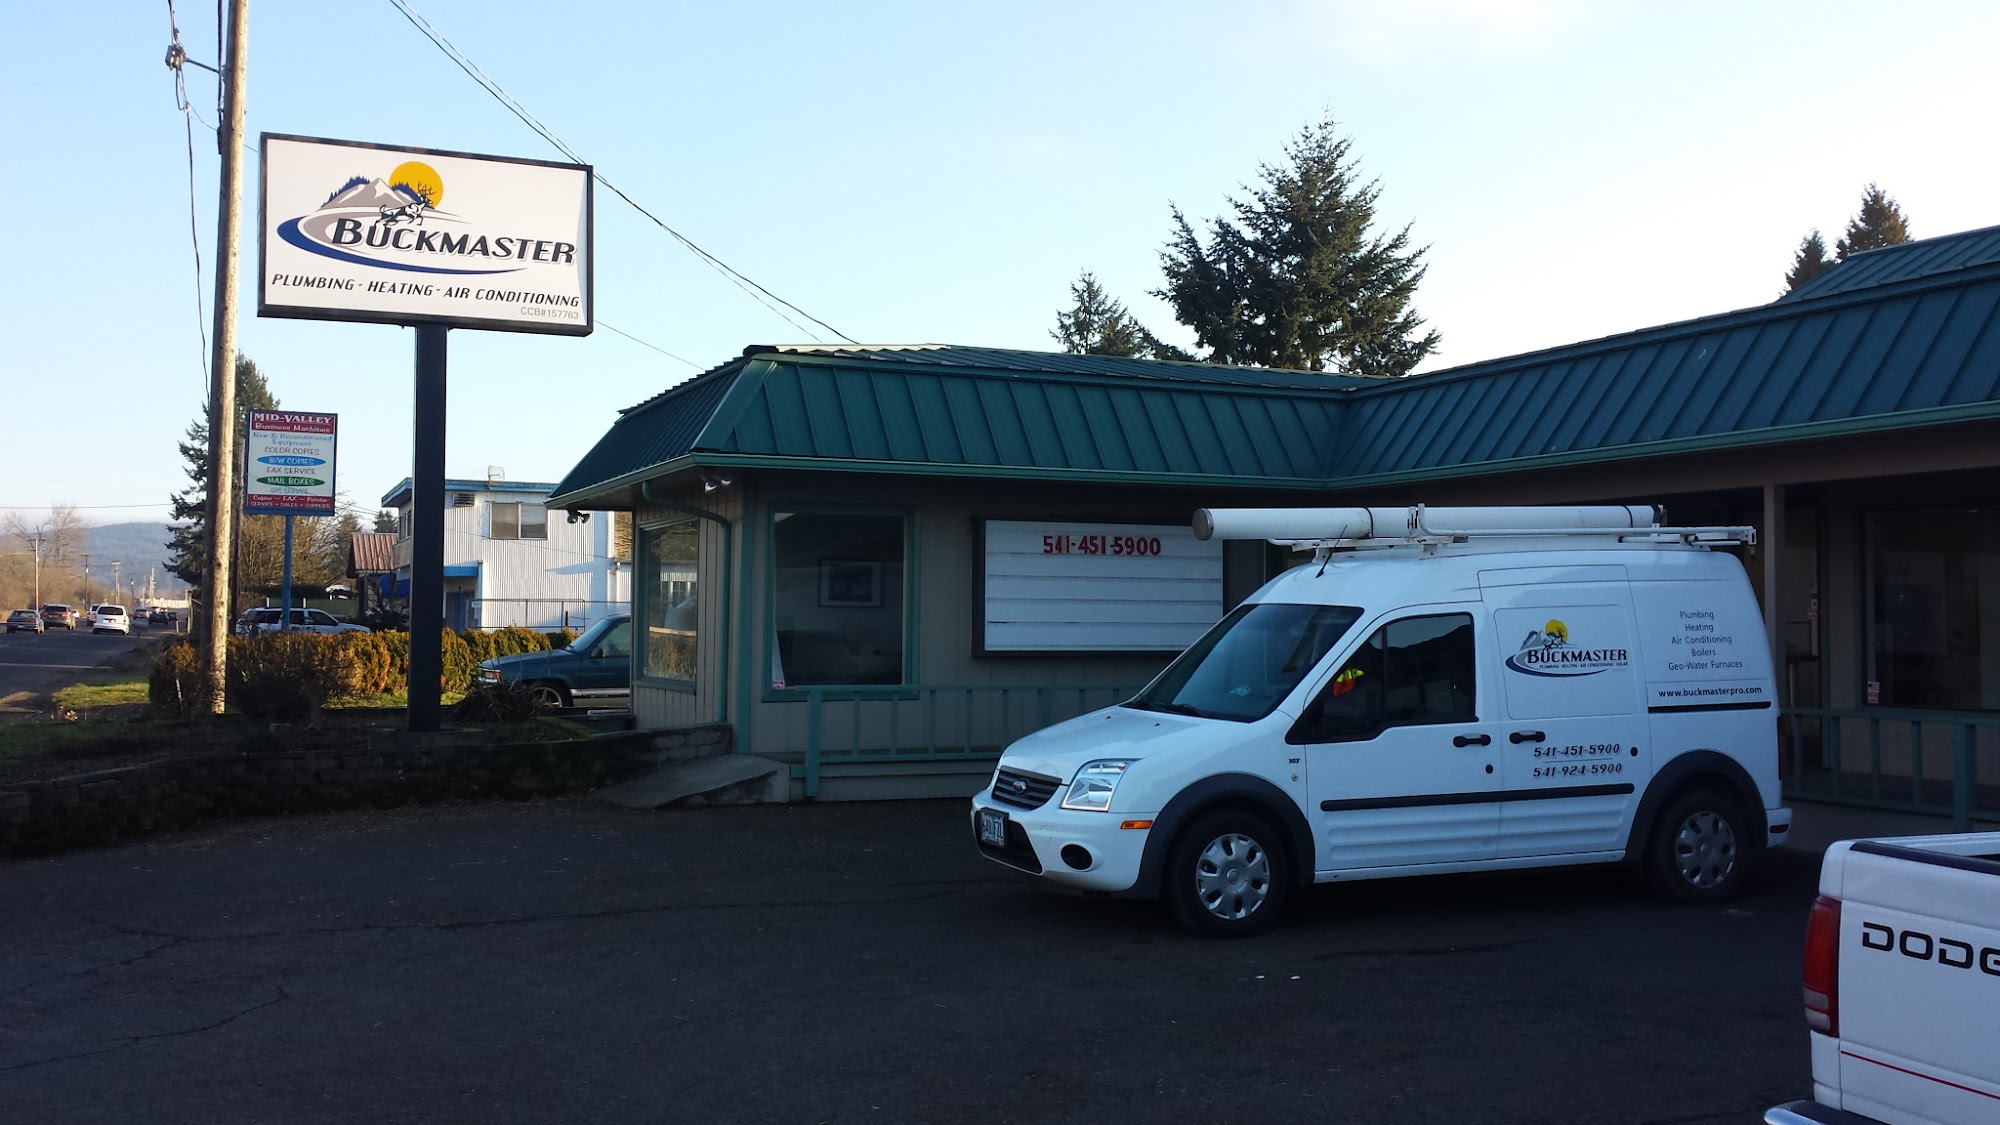 Buckmaster Plumbing, Heating and Air Conditioning